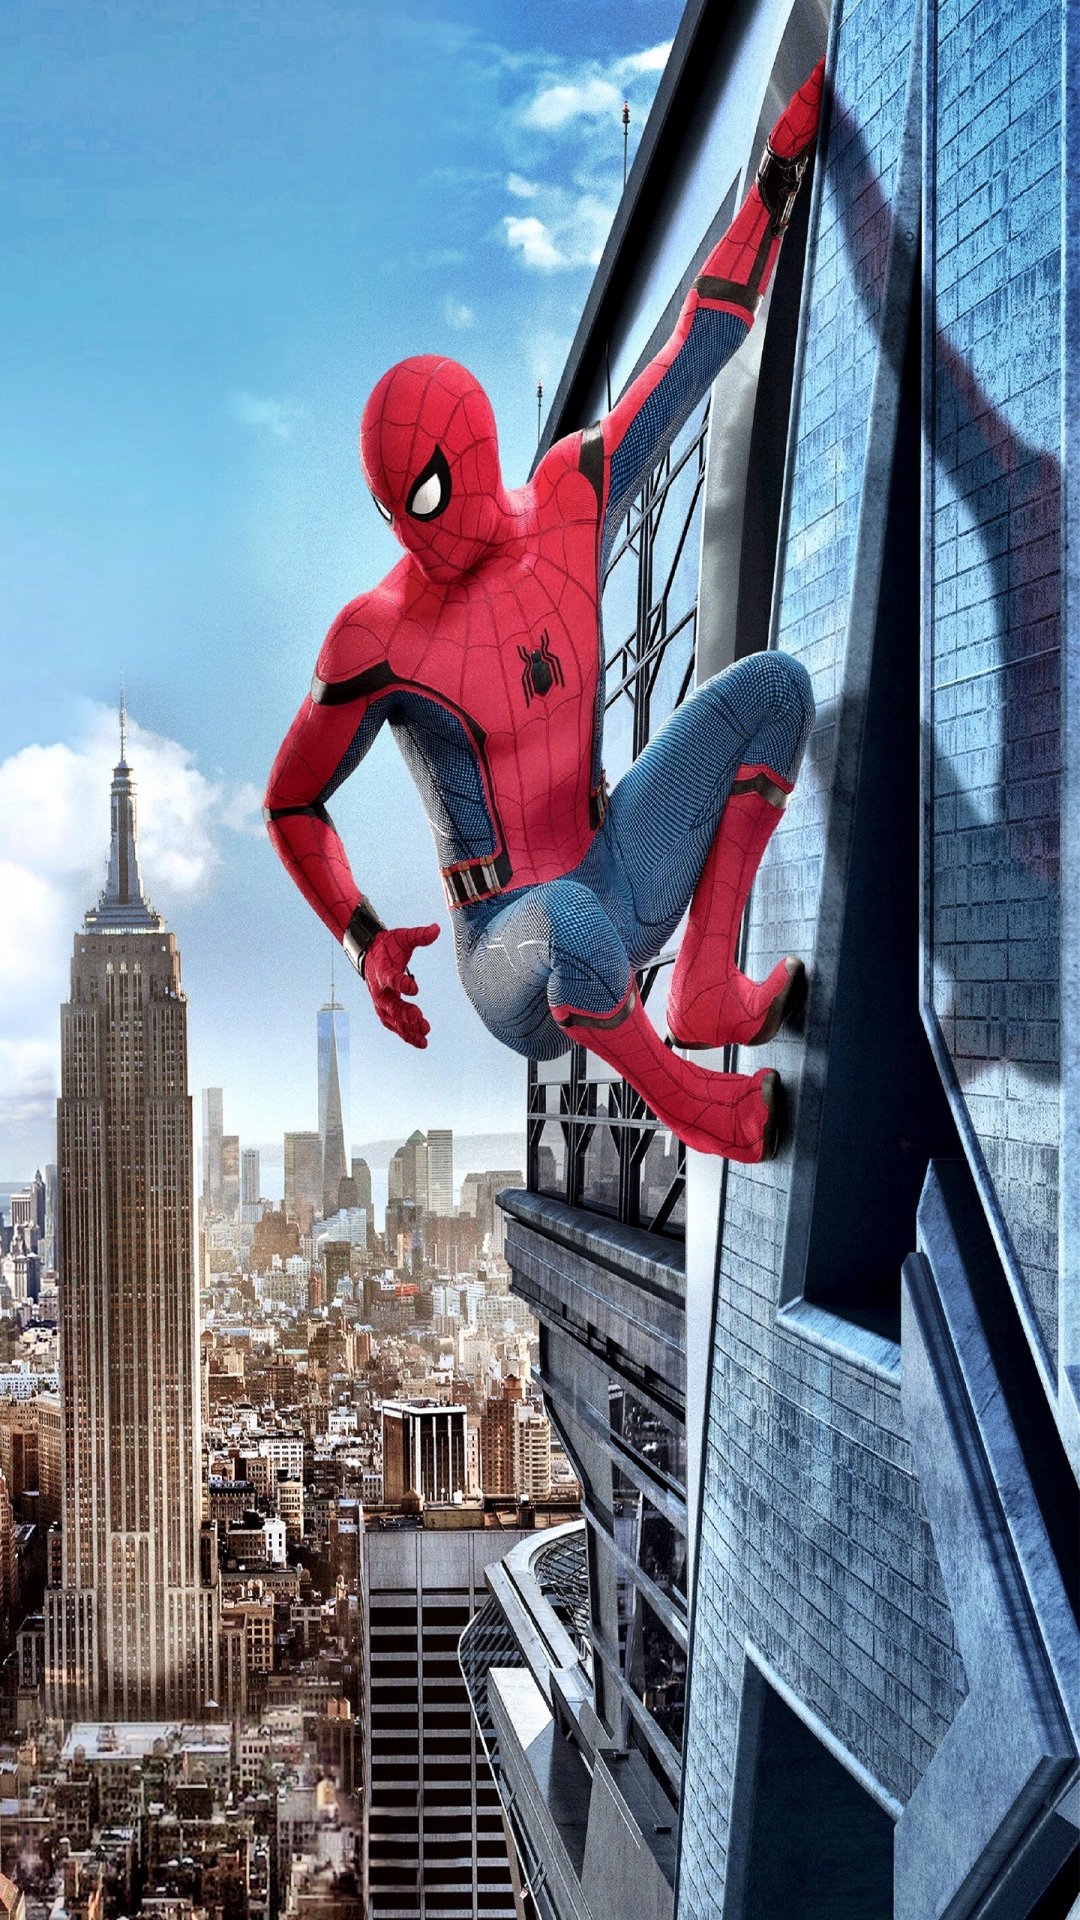 Spiderman Homecoming For Samsung A9 Pro & A7 Resolution - Note 10 Plus Wallpaper Punch Hole - HD Wallpaper 